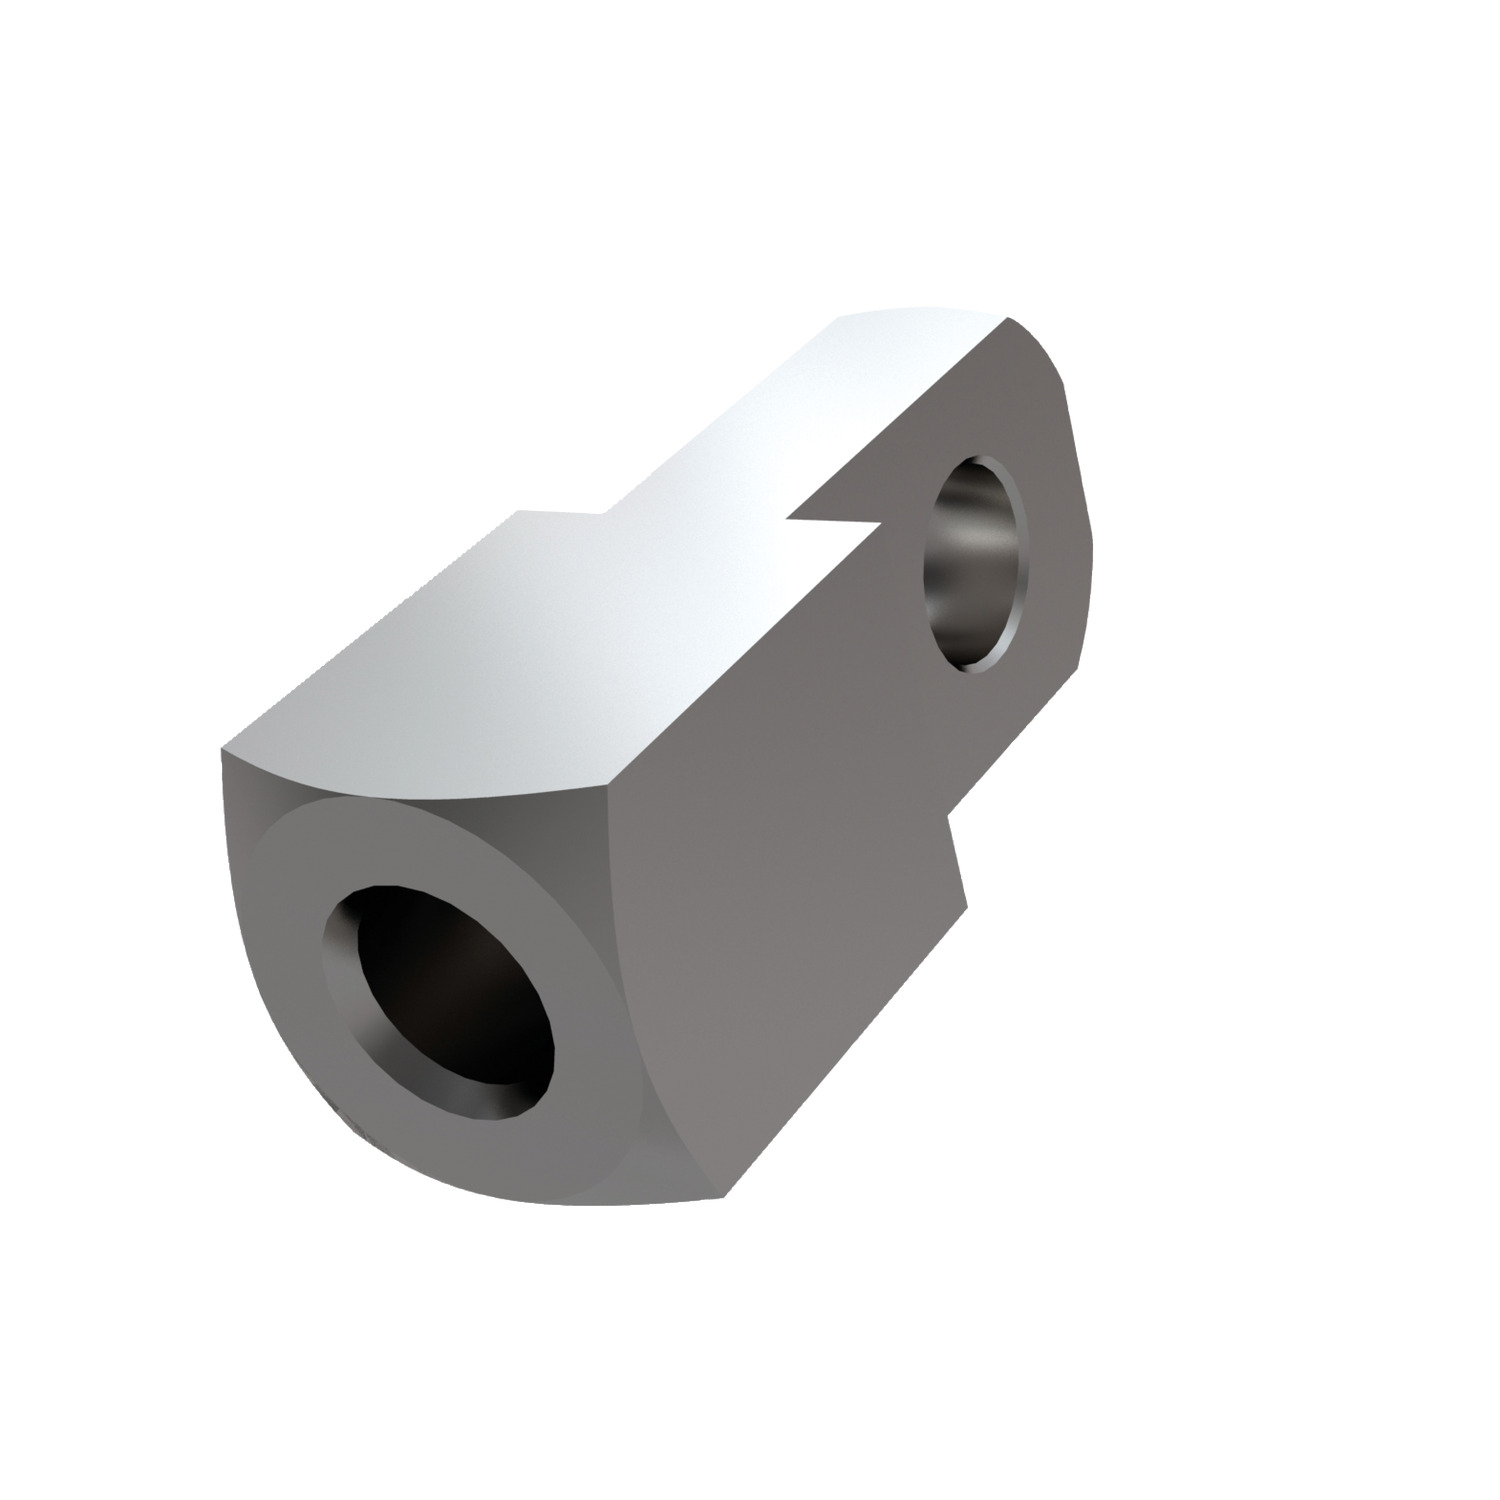 Product R3427, Stainless Mating Piece for Clevis Joints  left hand thread / 